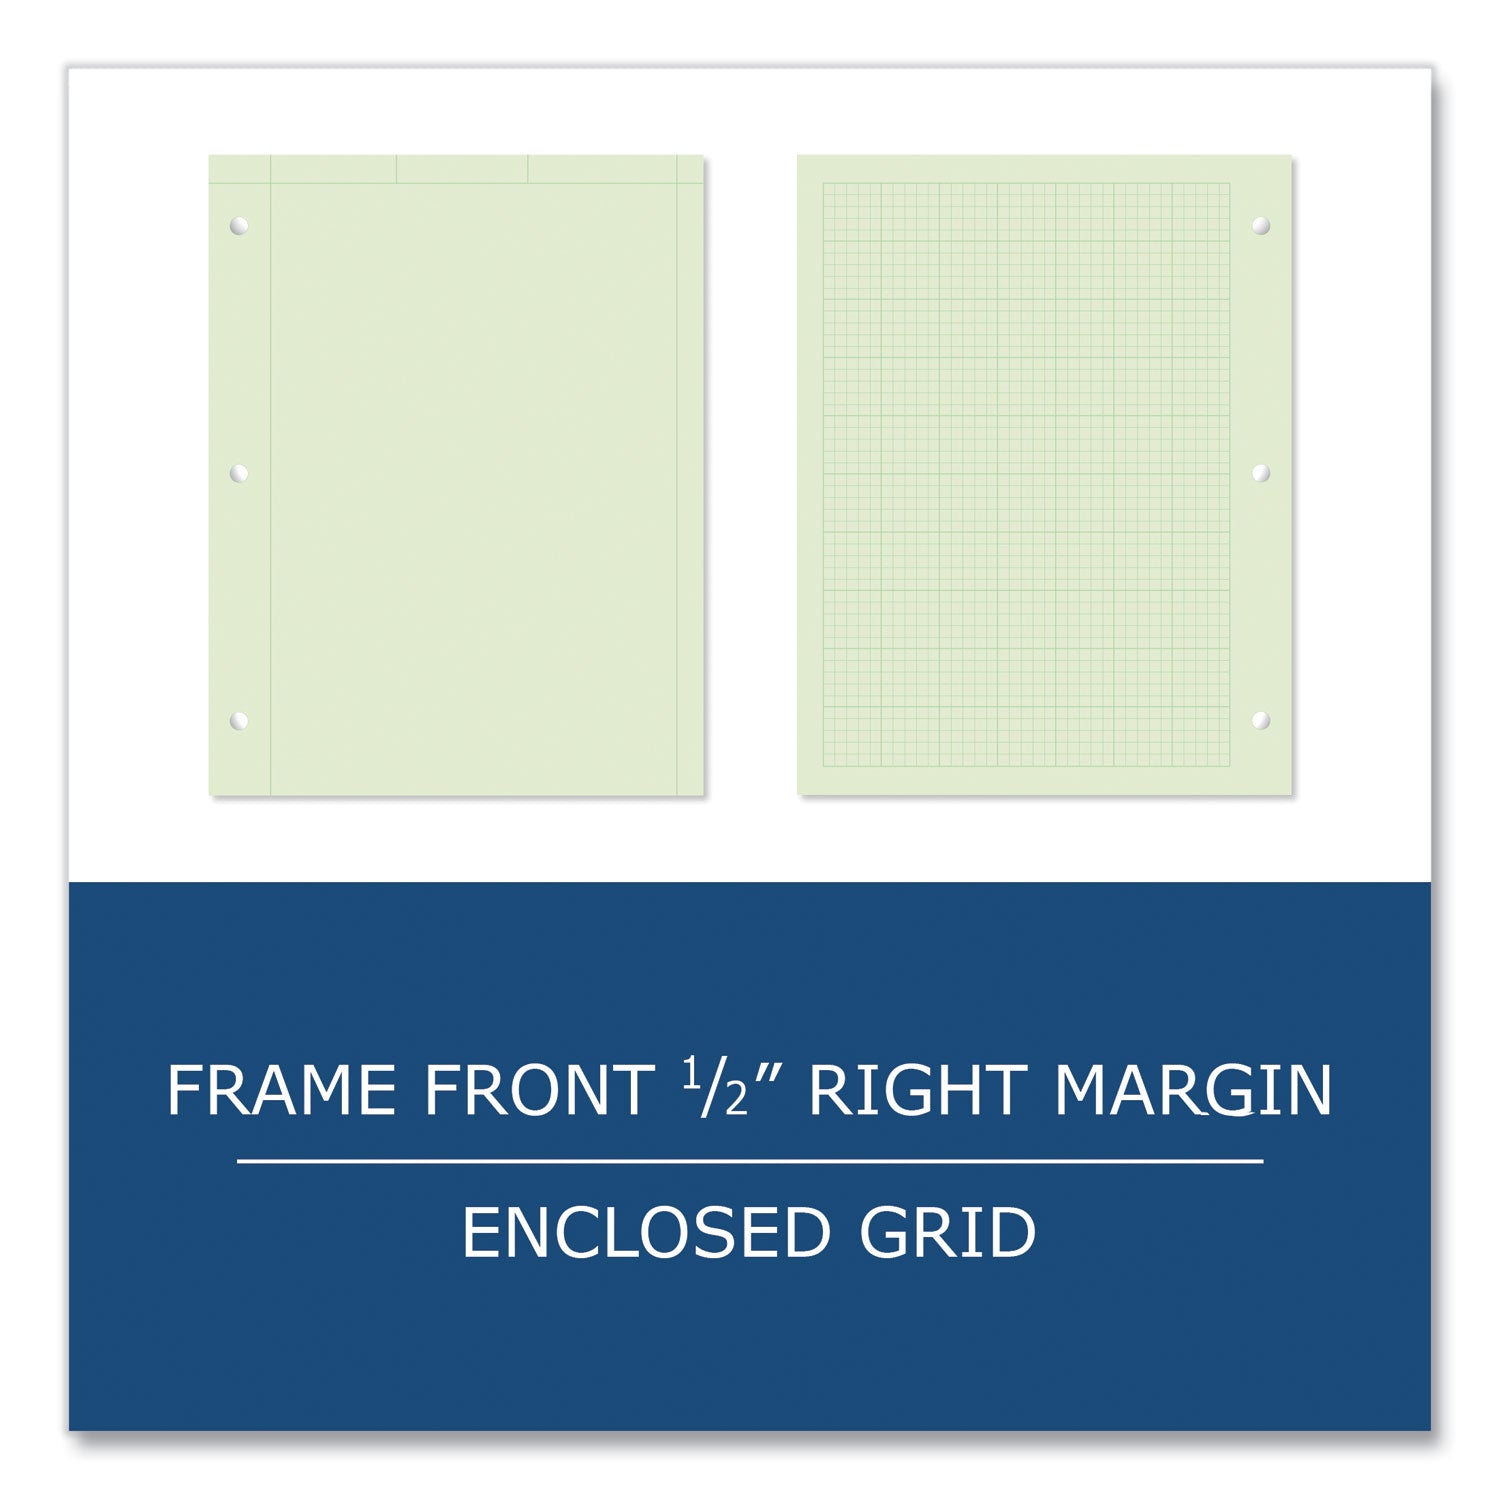 engineer-pad-05-margins-quad-rule-5-sq-in-1-sq-in-100-lt-green-85x11-sheets-pad-24-ct-ships-in-4-6-business-days_roa95382cs - 5